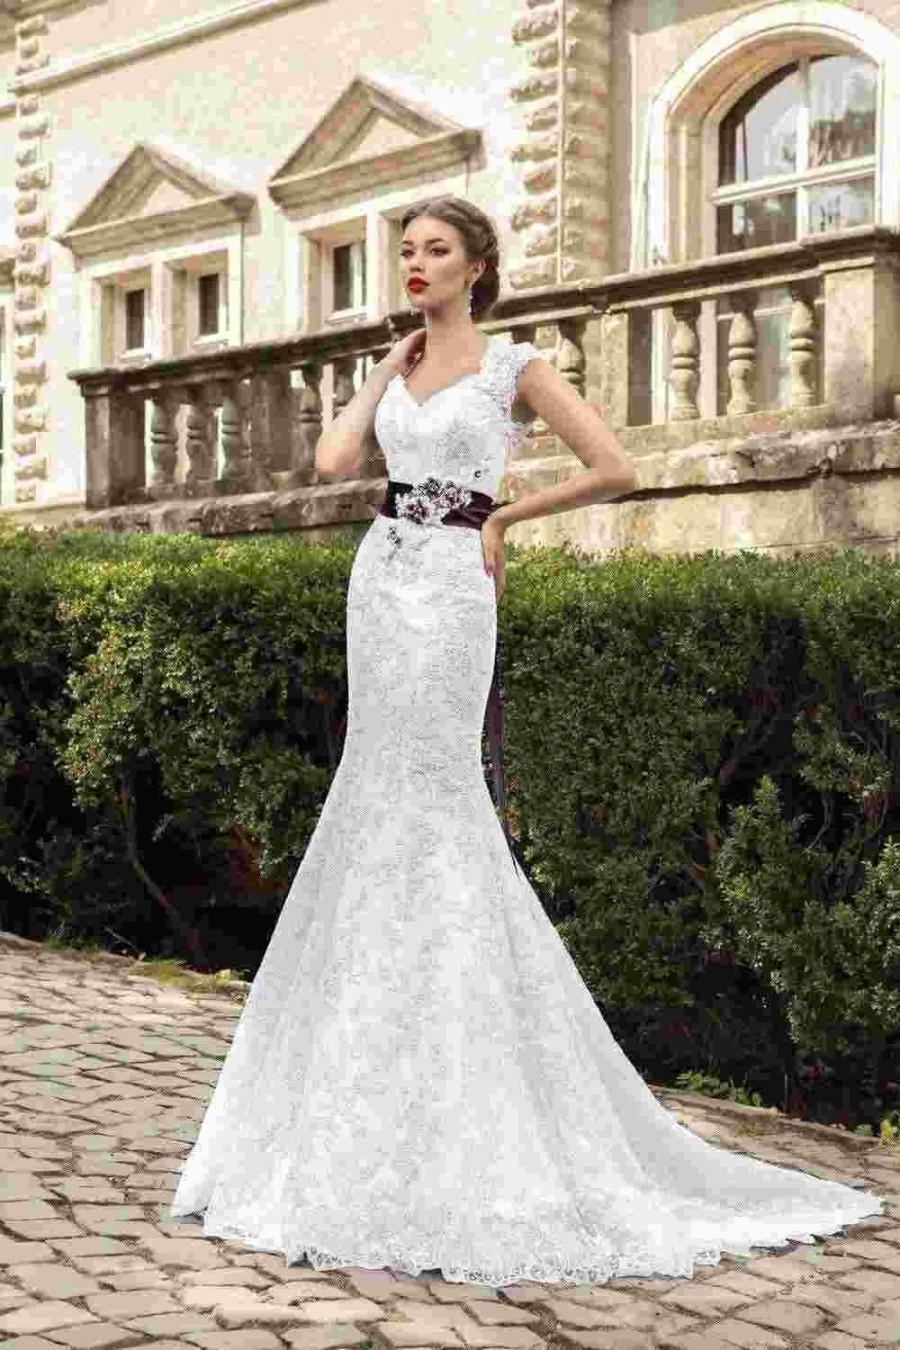 Wedding - 2016 New Arrival Wedding Dresses Flower Sweep Train Sexy Open Back White Lace Applique Mermaid Bridal Gowns With Beads Sash Online with $106.71/Piece on Hjklp88's Store 